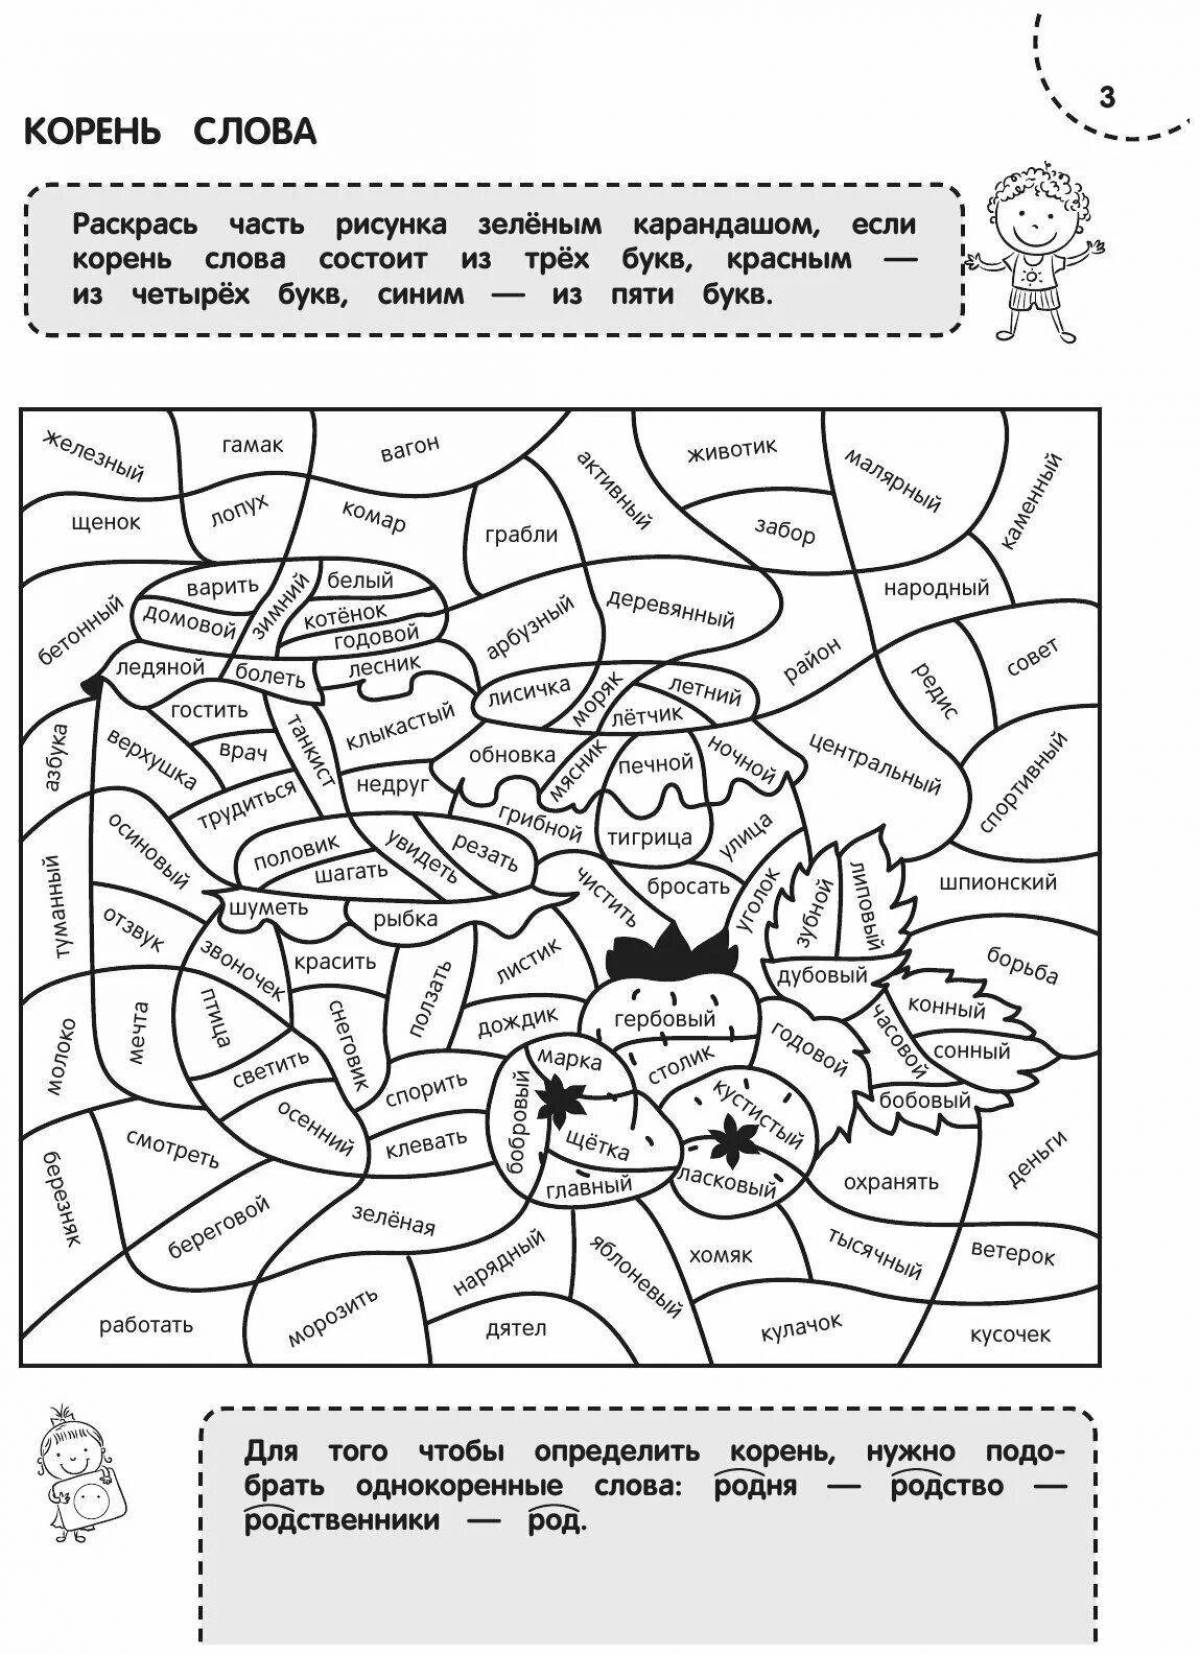 A fascinating Russian coloring book for 2nd grade